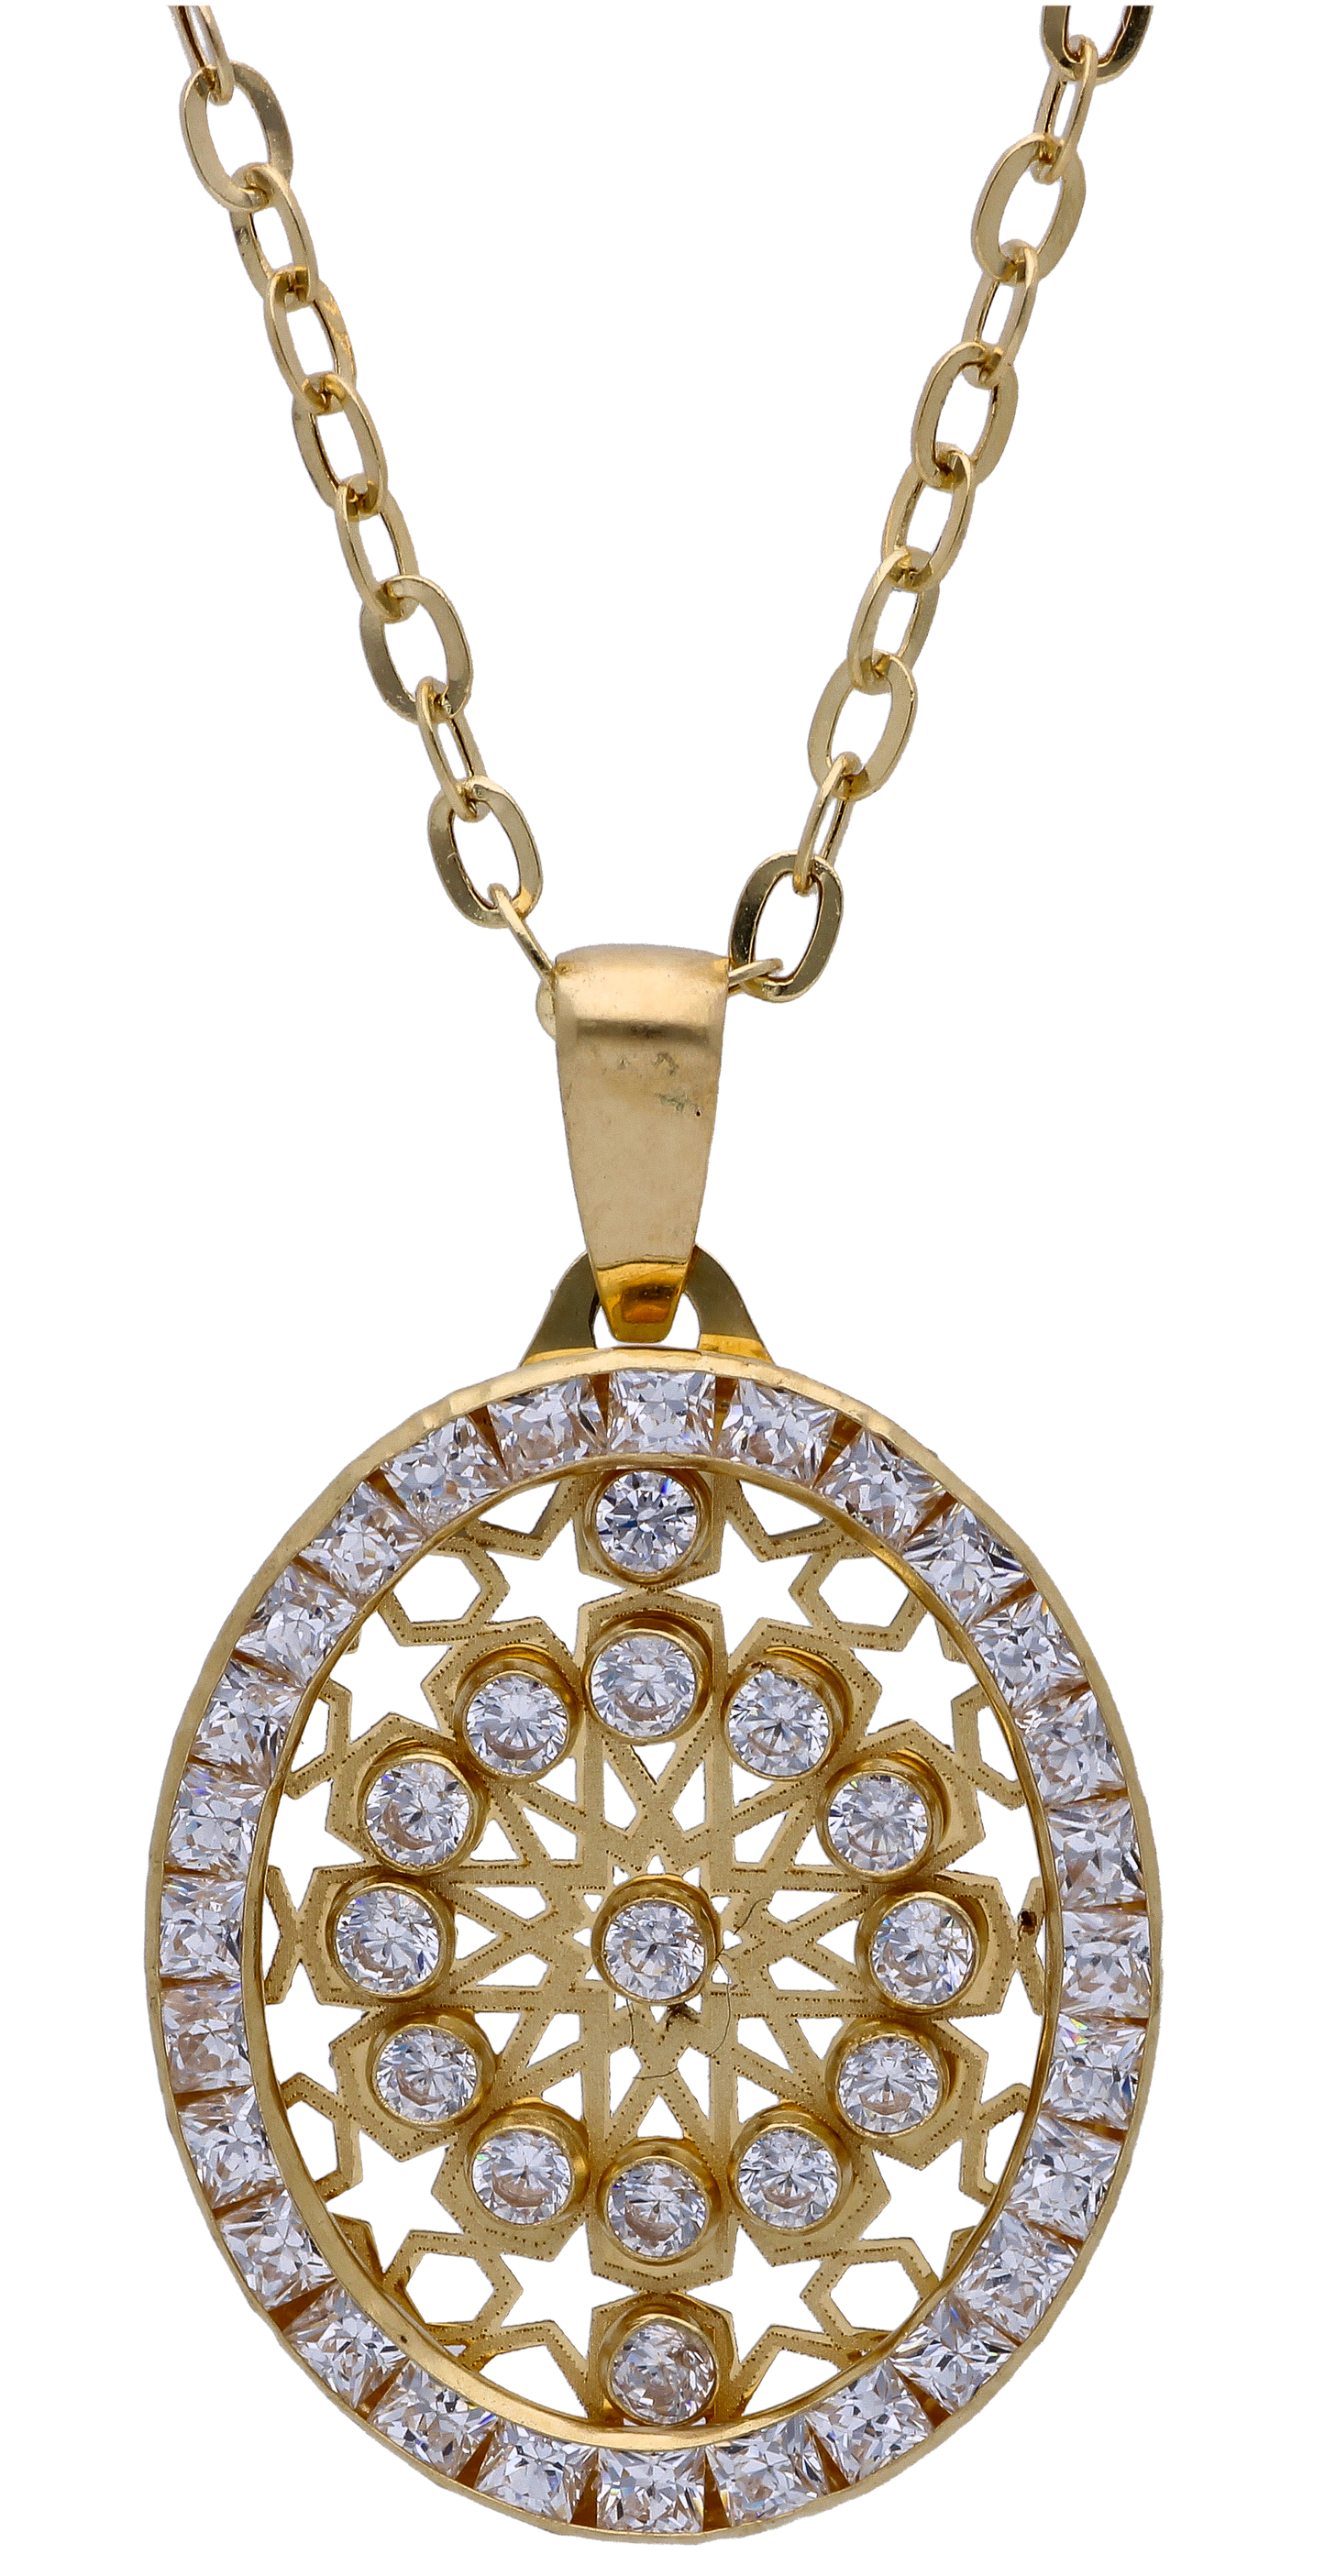 Gold Necklace (Chain with Zircon Gold Pendant) 18KT - FKJNKL18KU6297